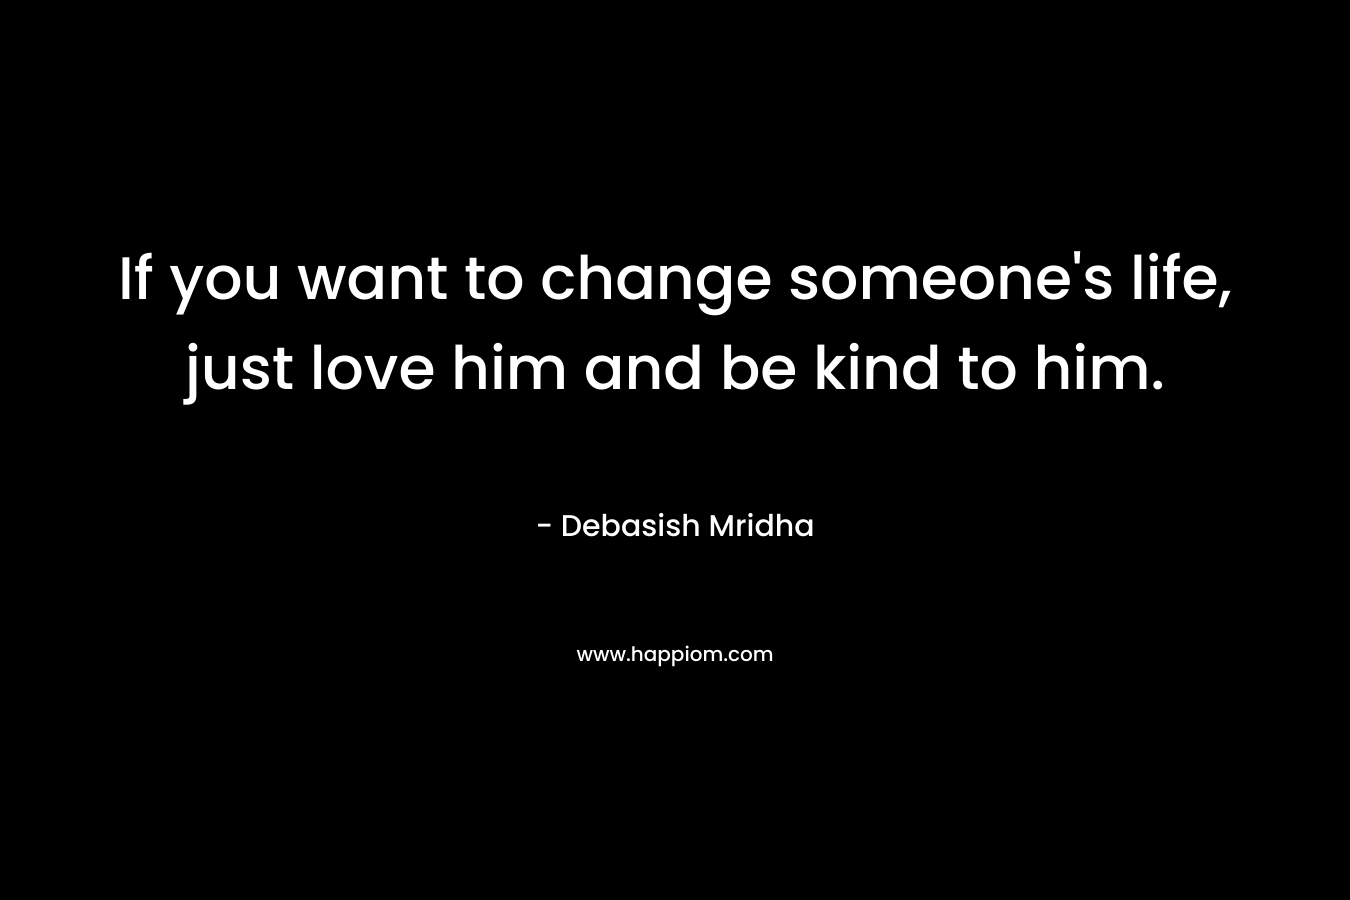 If you want to change someone's life, just love him and be kind to him.